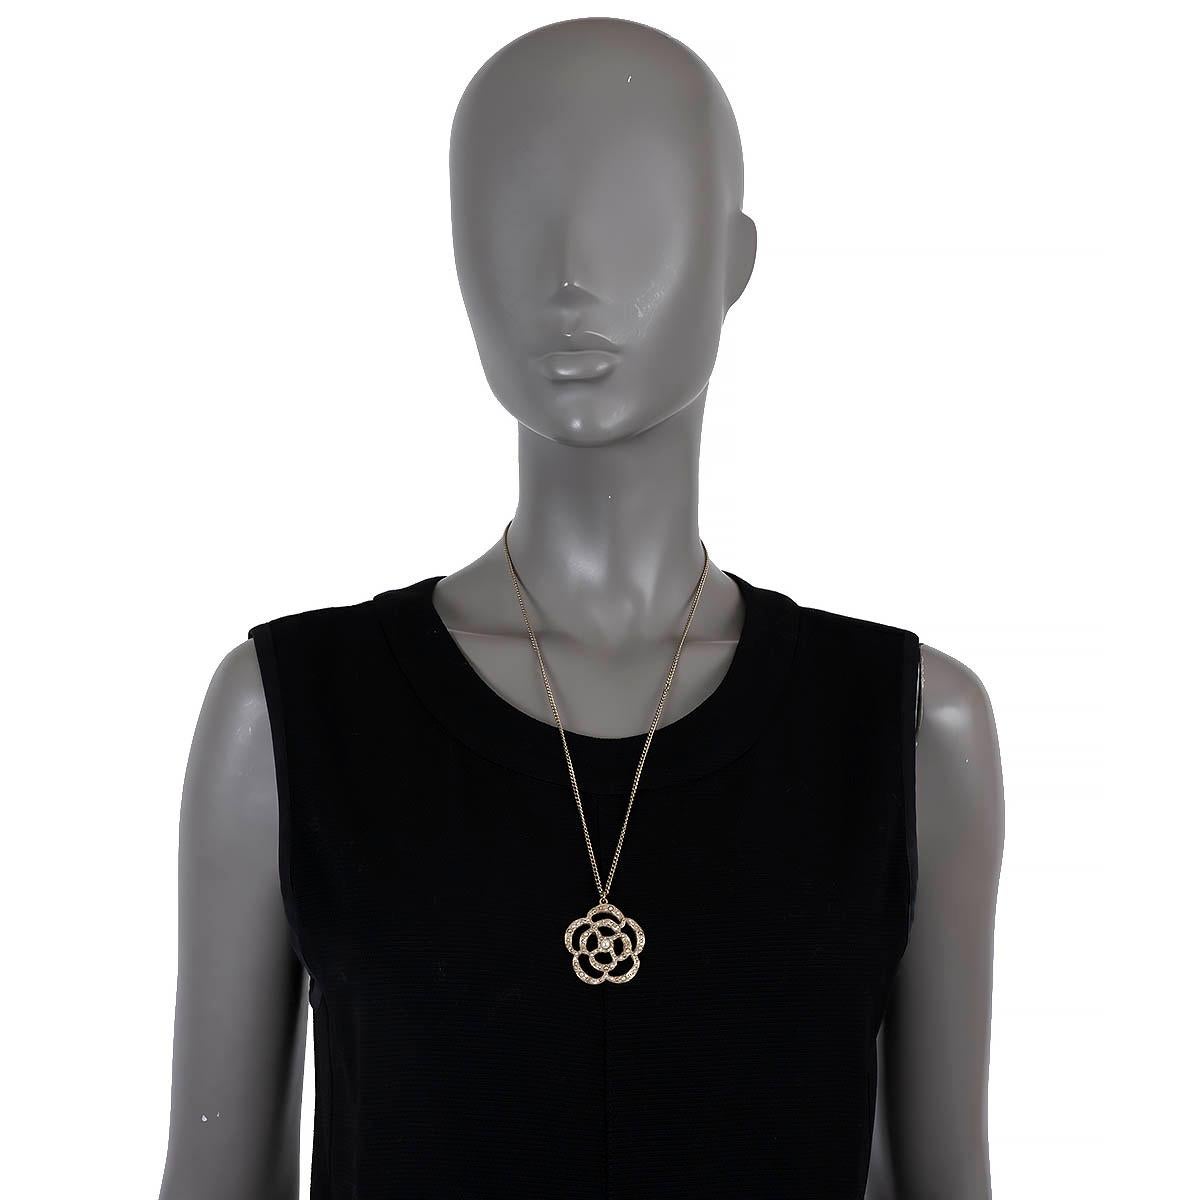 100% authentic Chanel chain necklace in gold-tone metal with crystal and faux pearl encrusted Camellia pendant. Has been worn and is in excellent condition. 

2014 Continuous Collection

Measurements
Model	14V
Width	3.4cm (1.3in)
Height	3.5cm